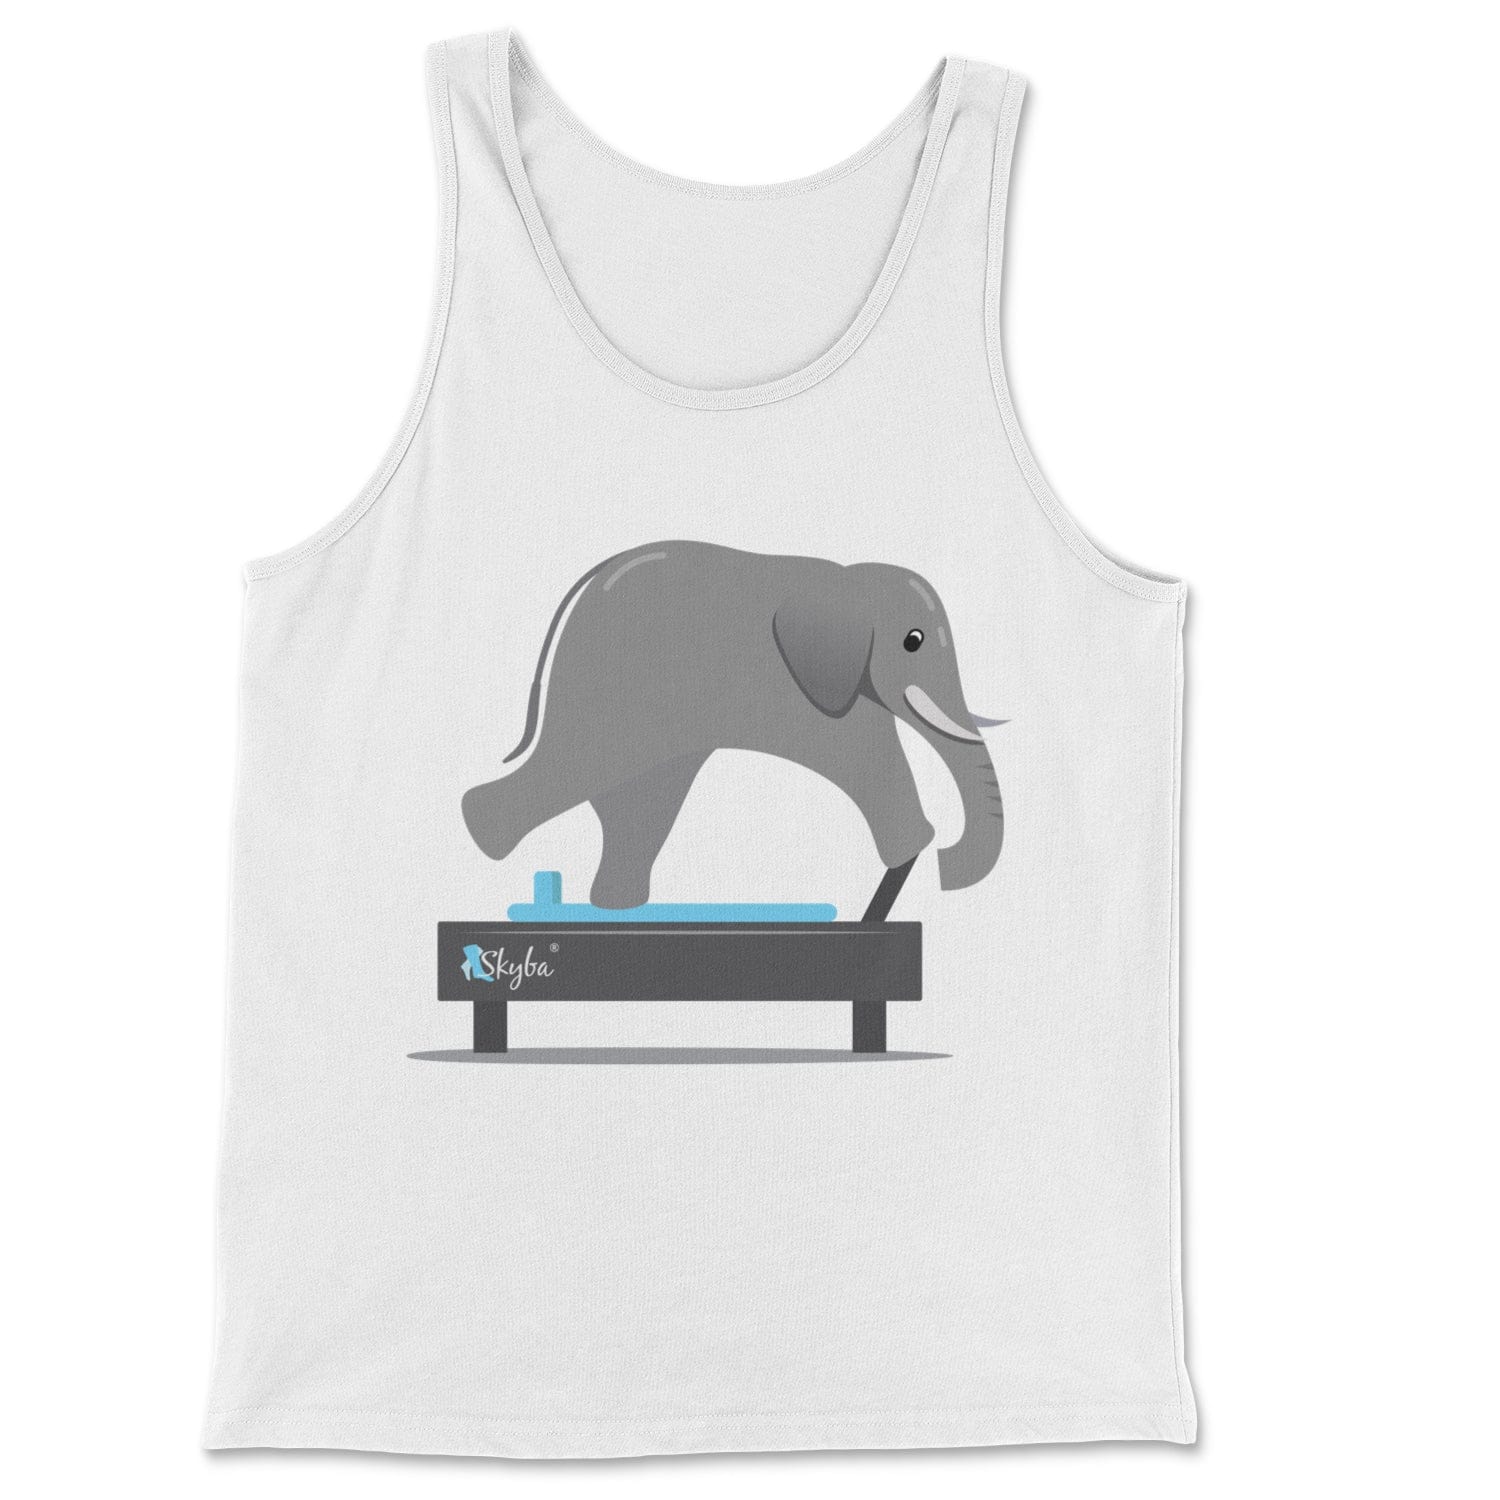 Elephant on the Reformer - Classic Tank Skyba Print Material